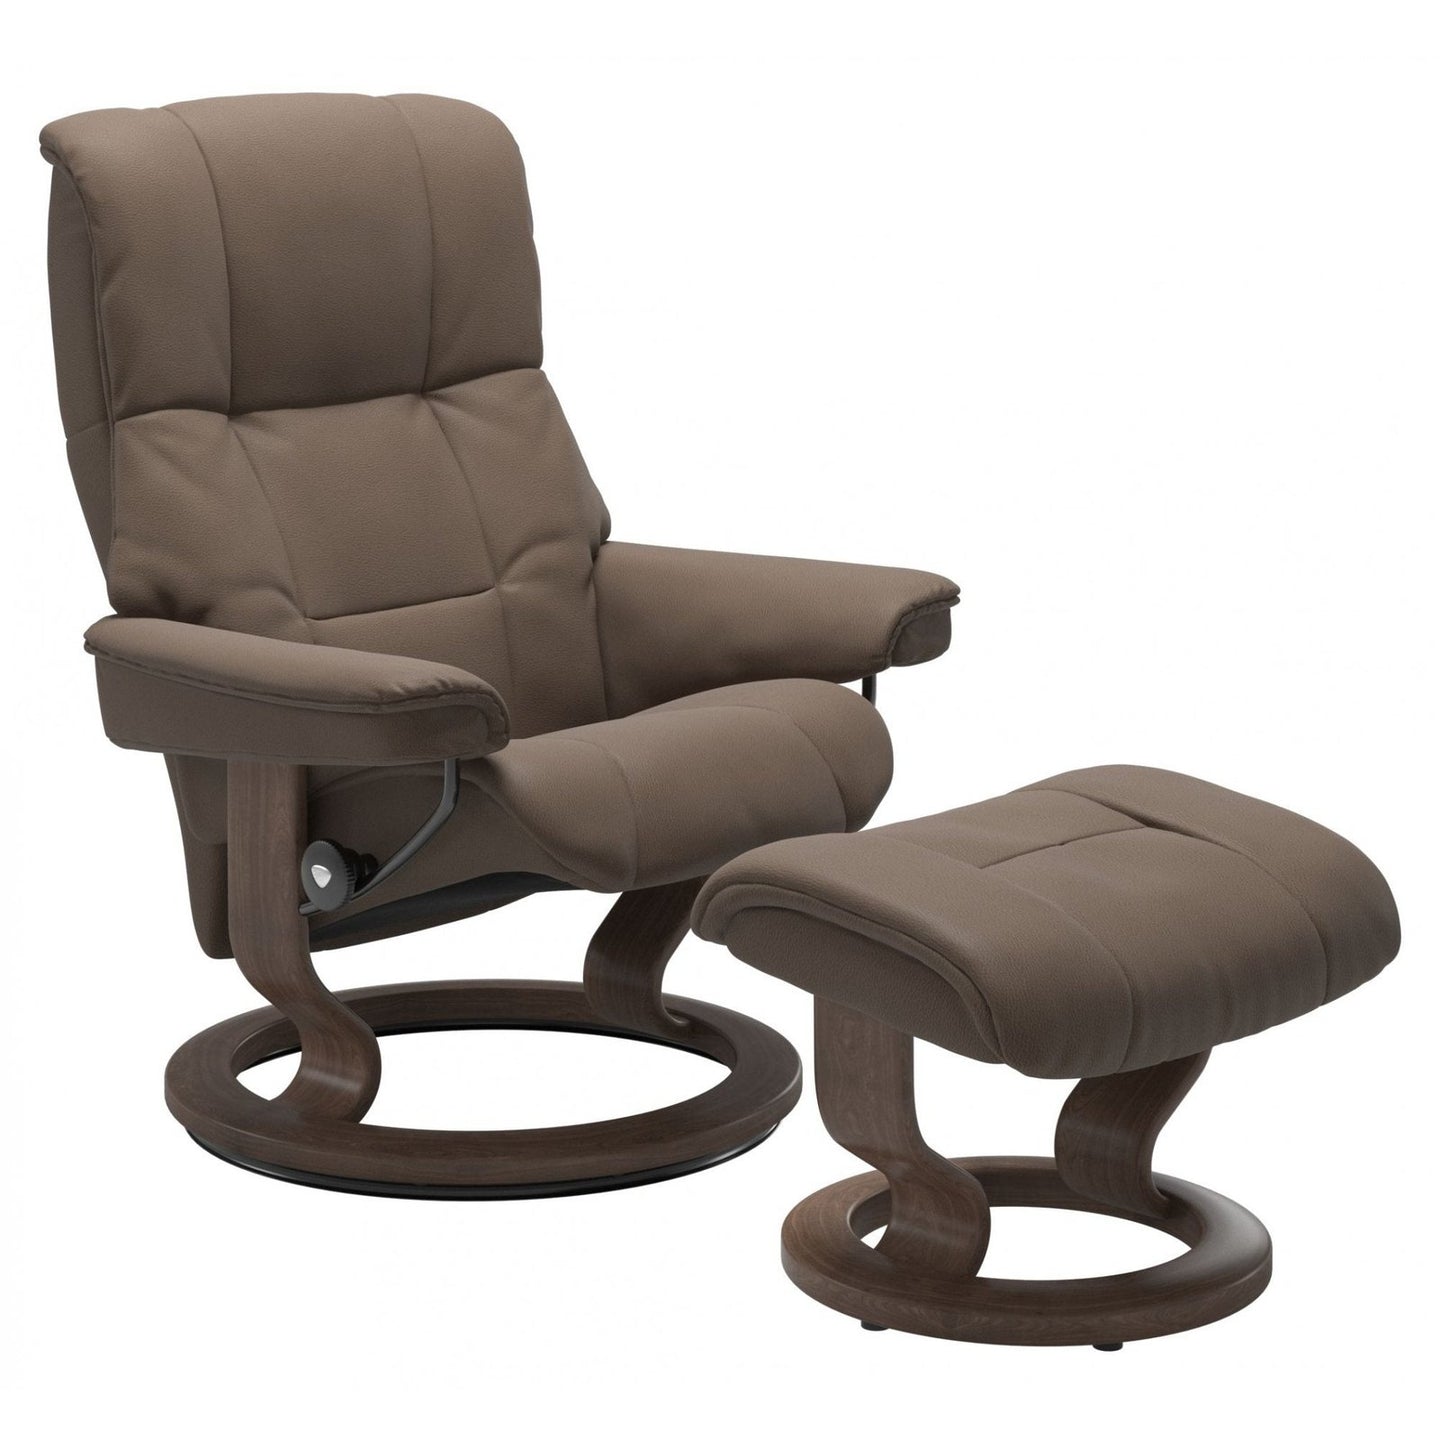 Stressless Mayfair Large Classic Recliner with Stool - Hunter Furnishing